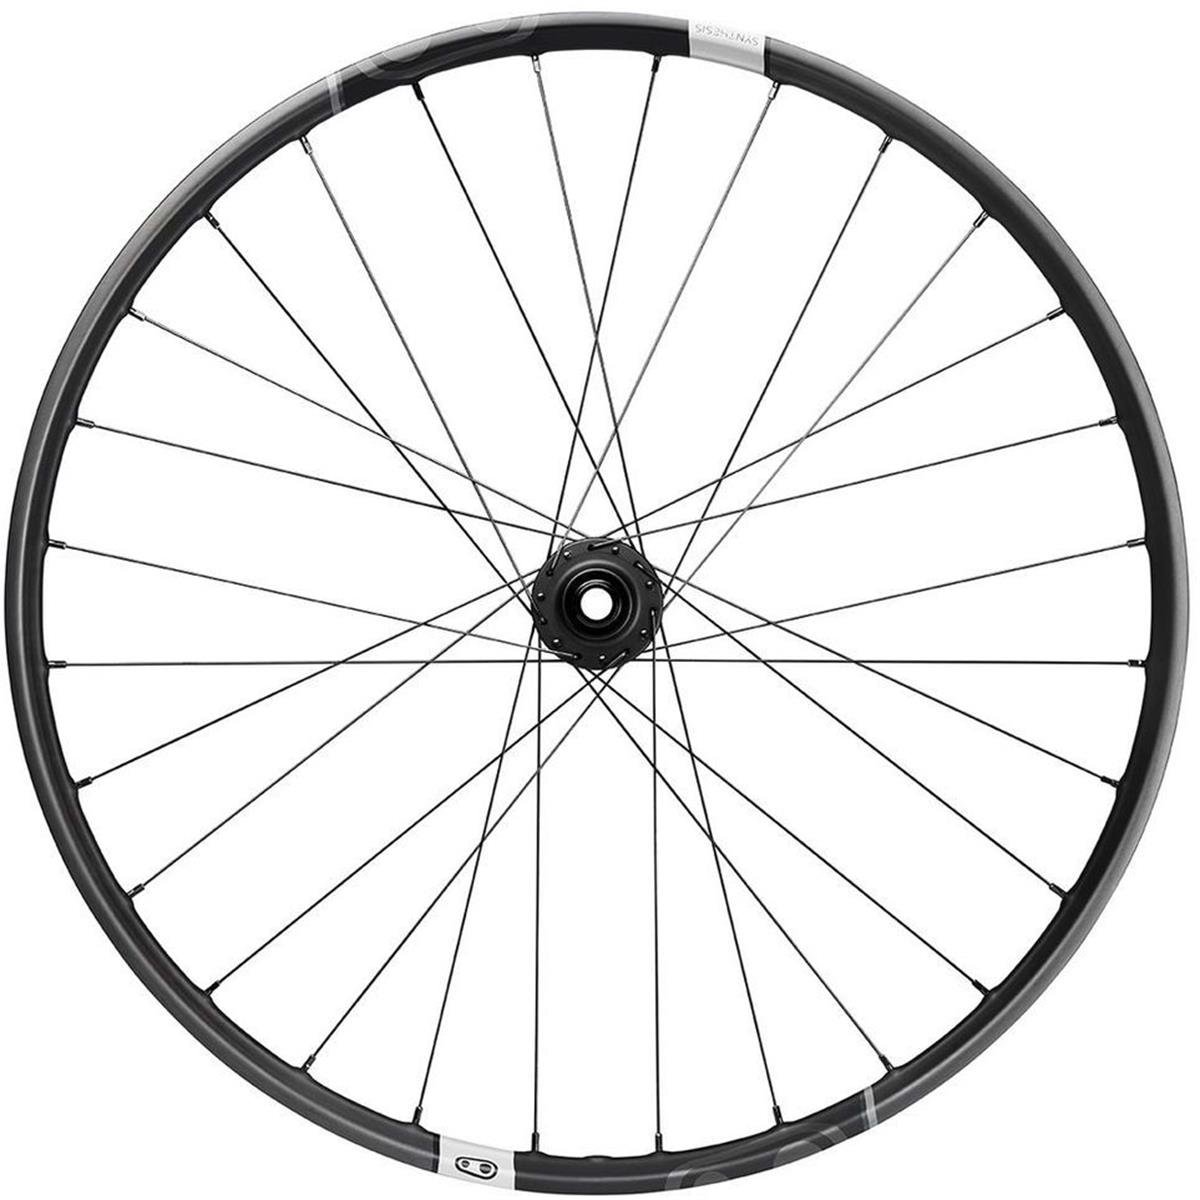 Crankbrothers Roue Synthesis Alu Enduro Avant, 27.5 Inch, 15x110 mm, Tubeless Ready